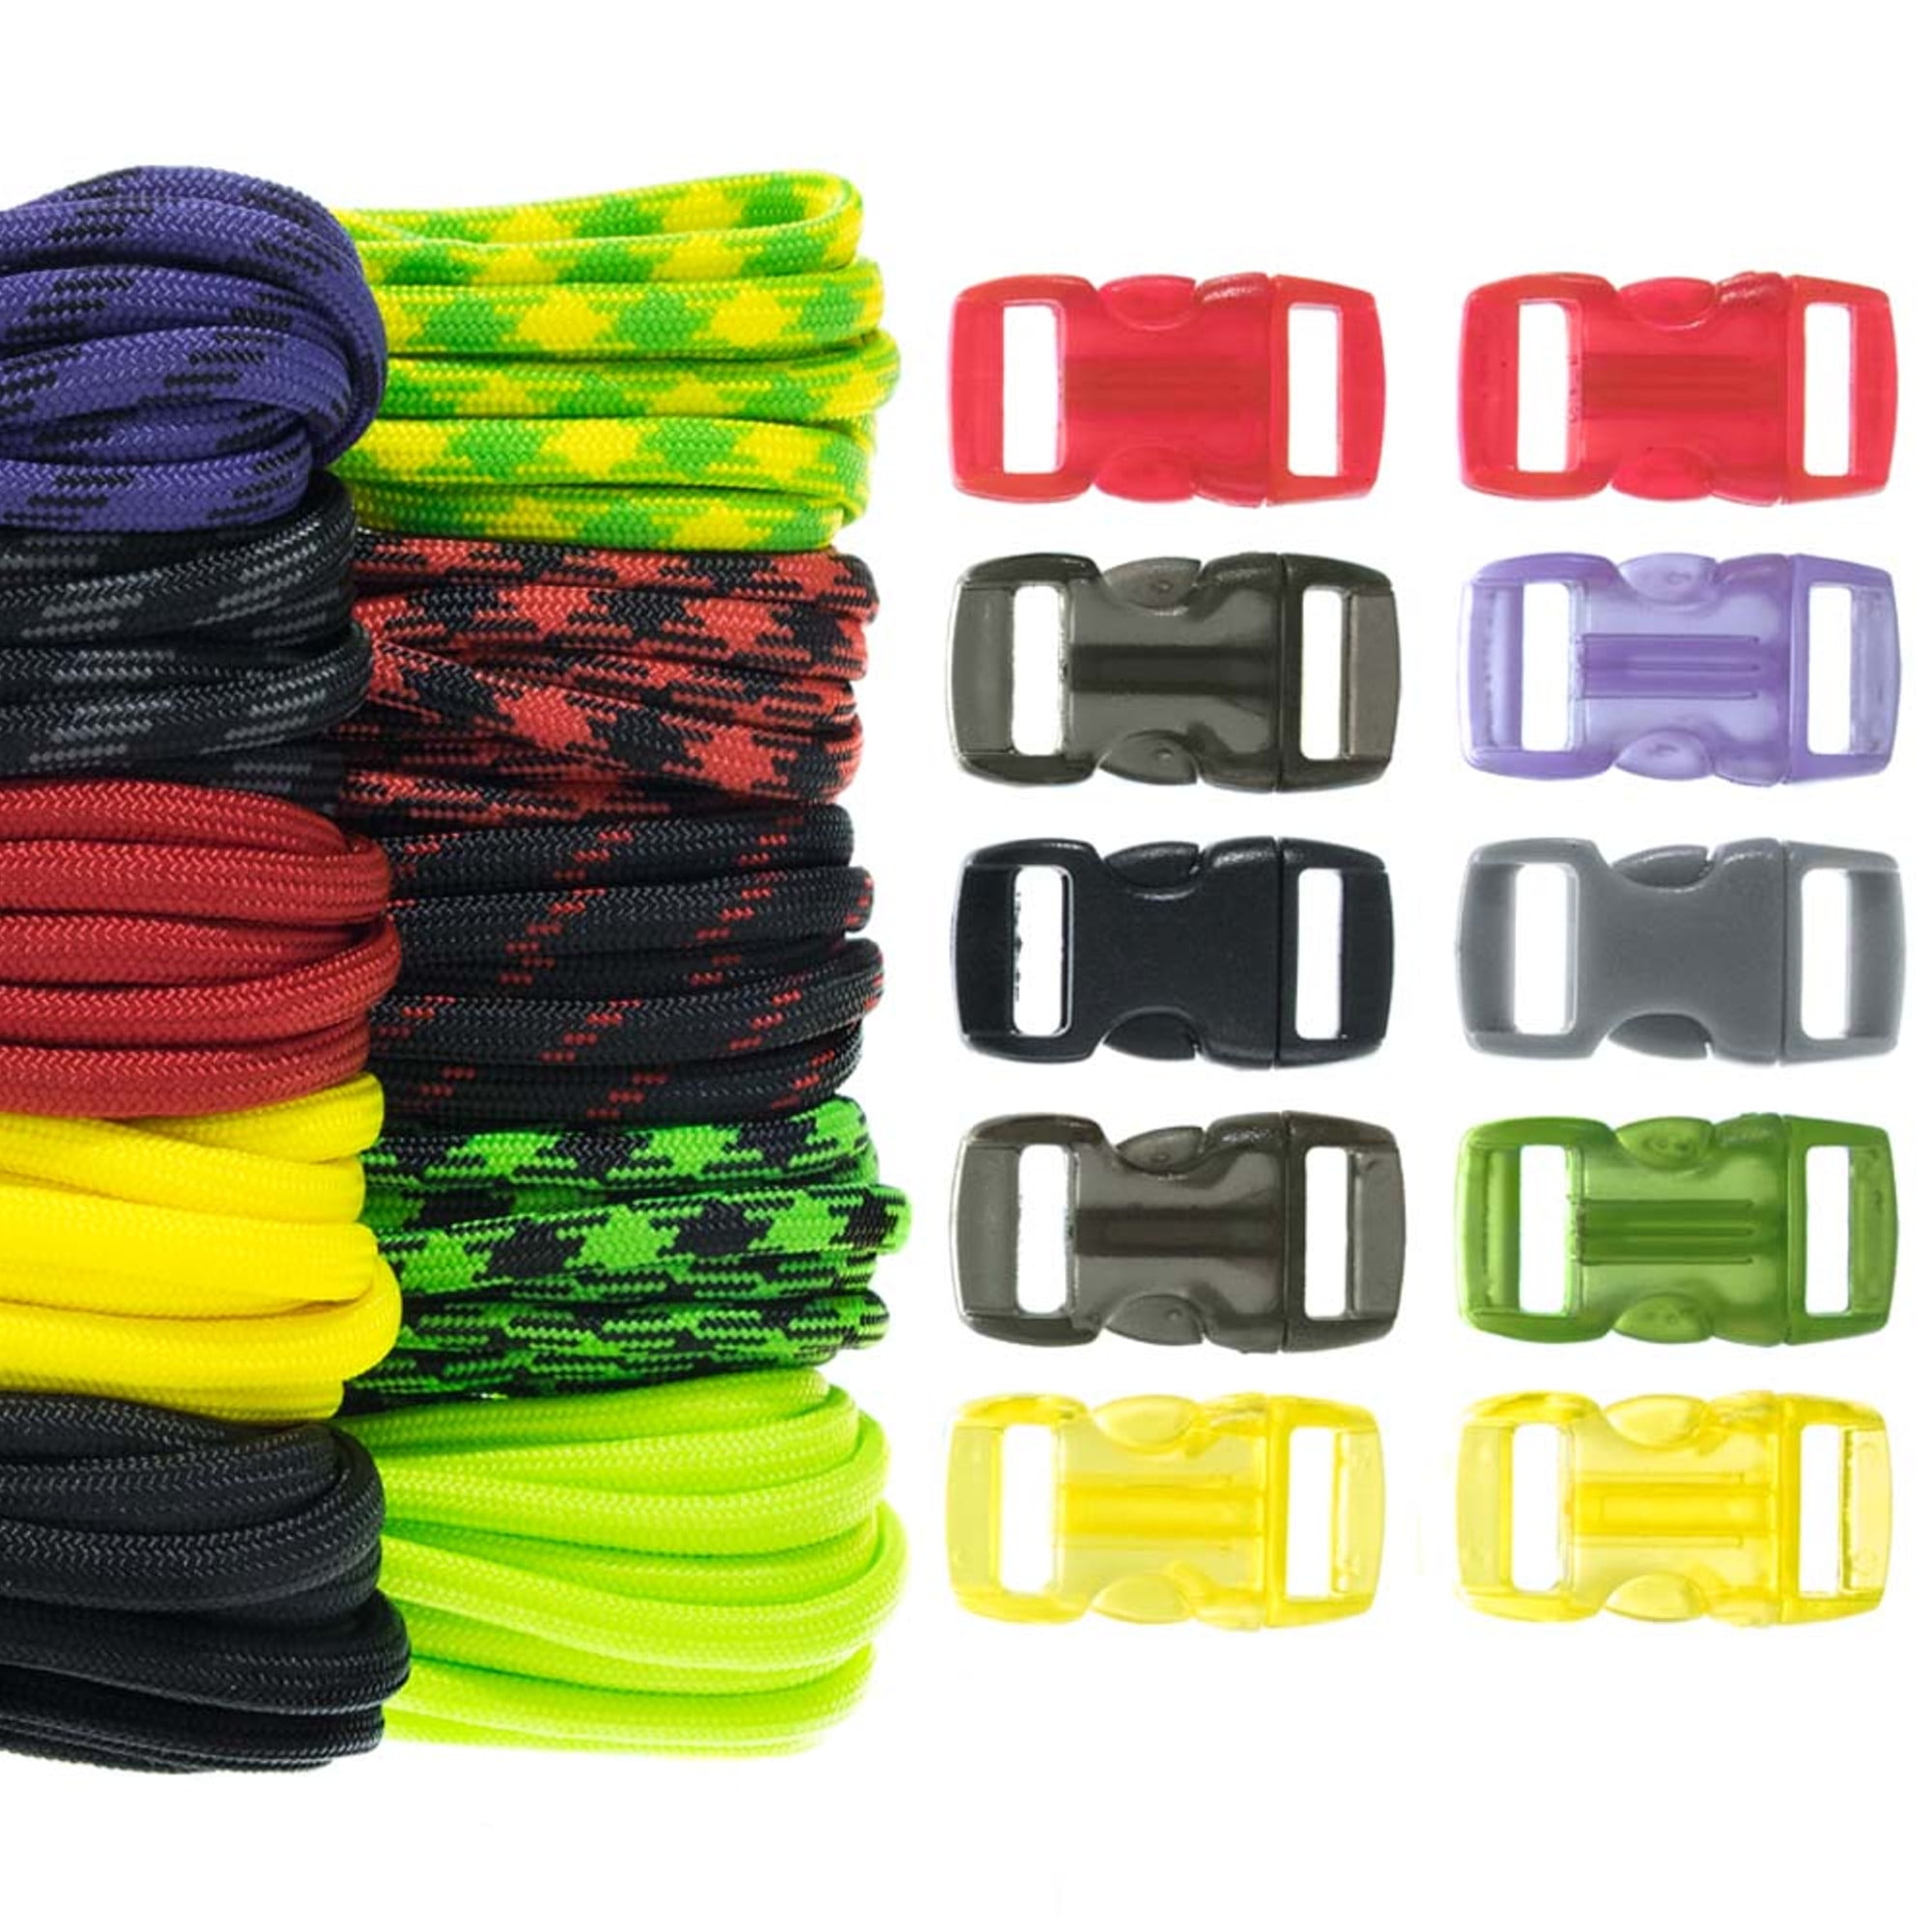 Paracord Pack 15 Color 5 yard Metre Rolls Multi-Colored Assortment Para Cord 